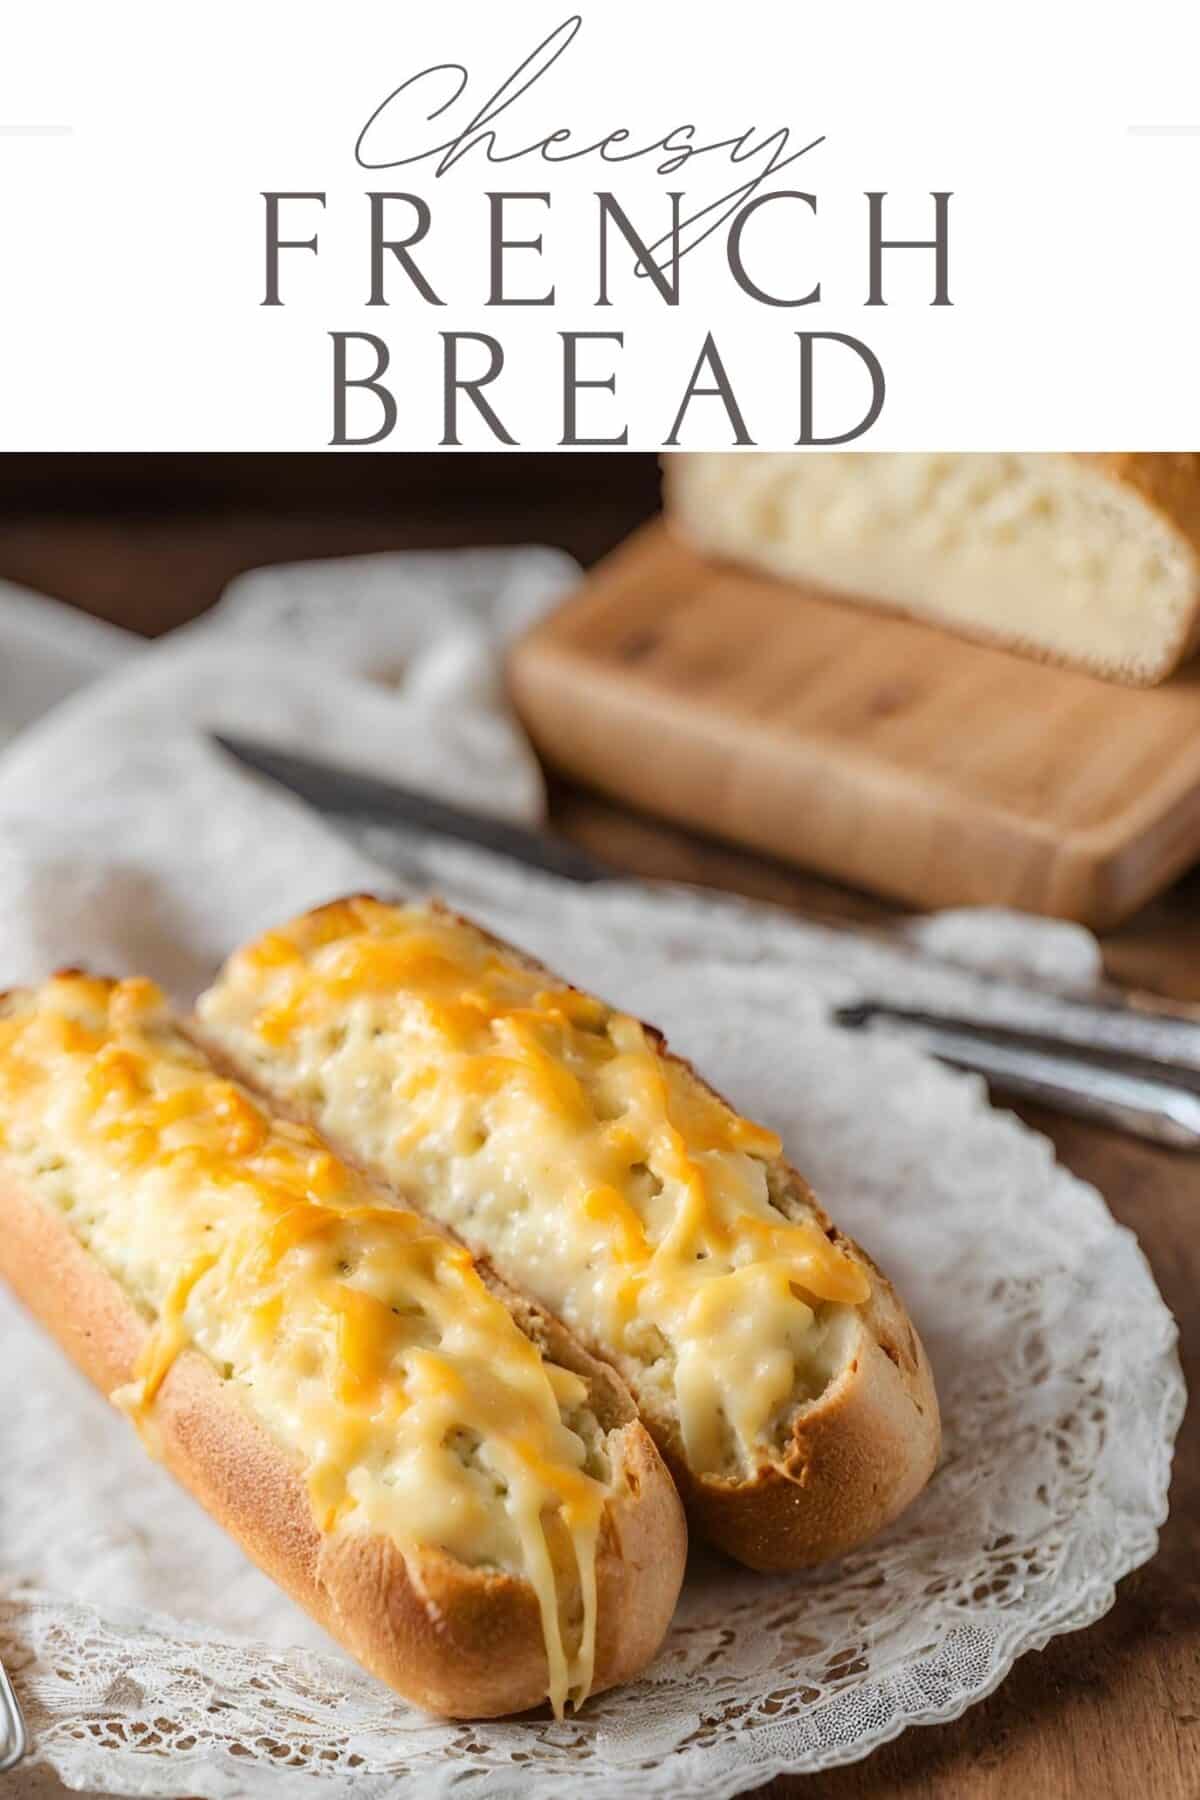 Cheese covered french bread on a lace placemat on a wooden table with the words cheesy french bread across the top of the image.